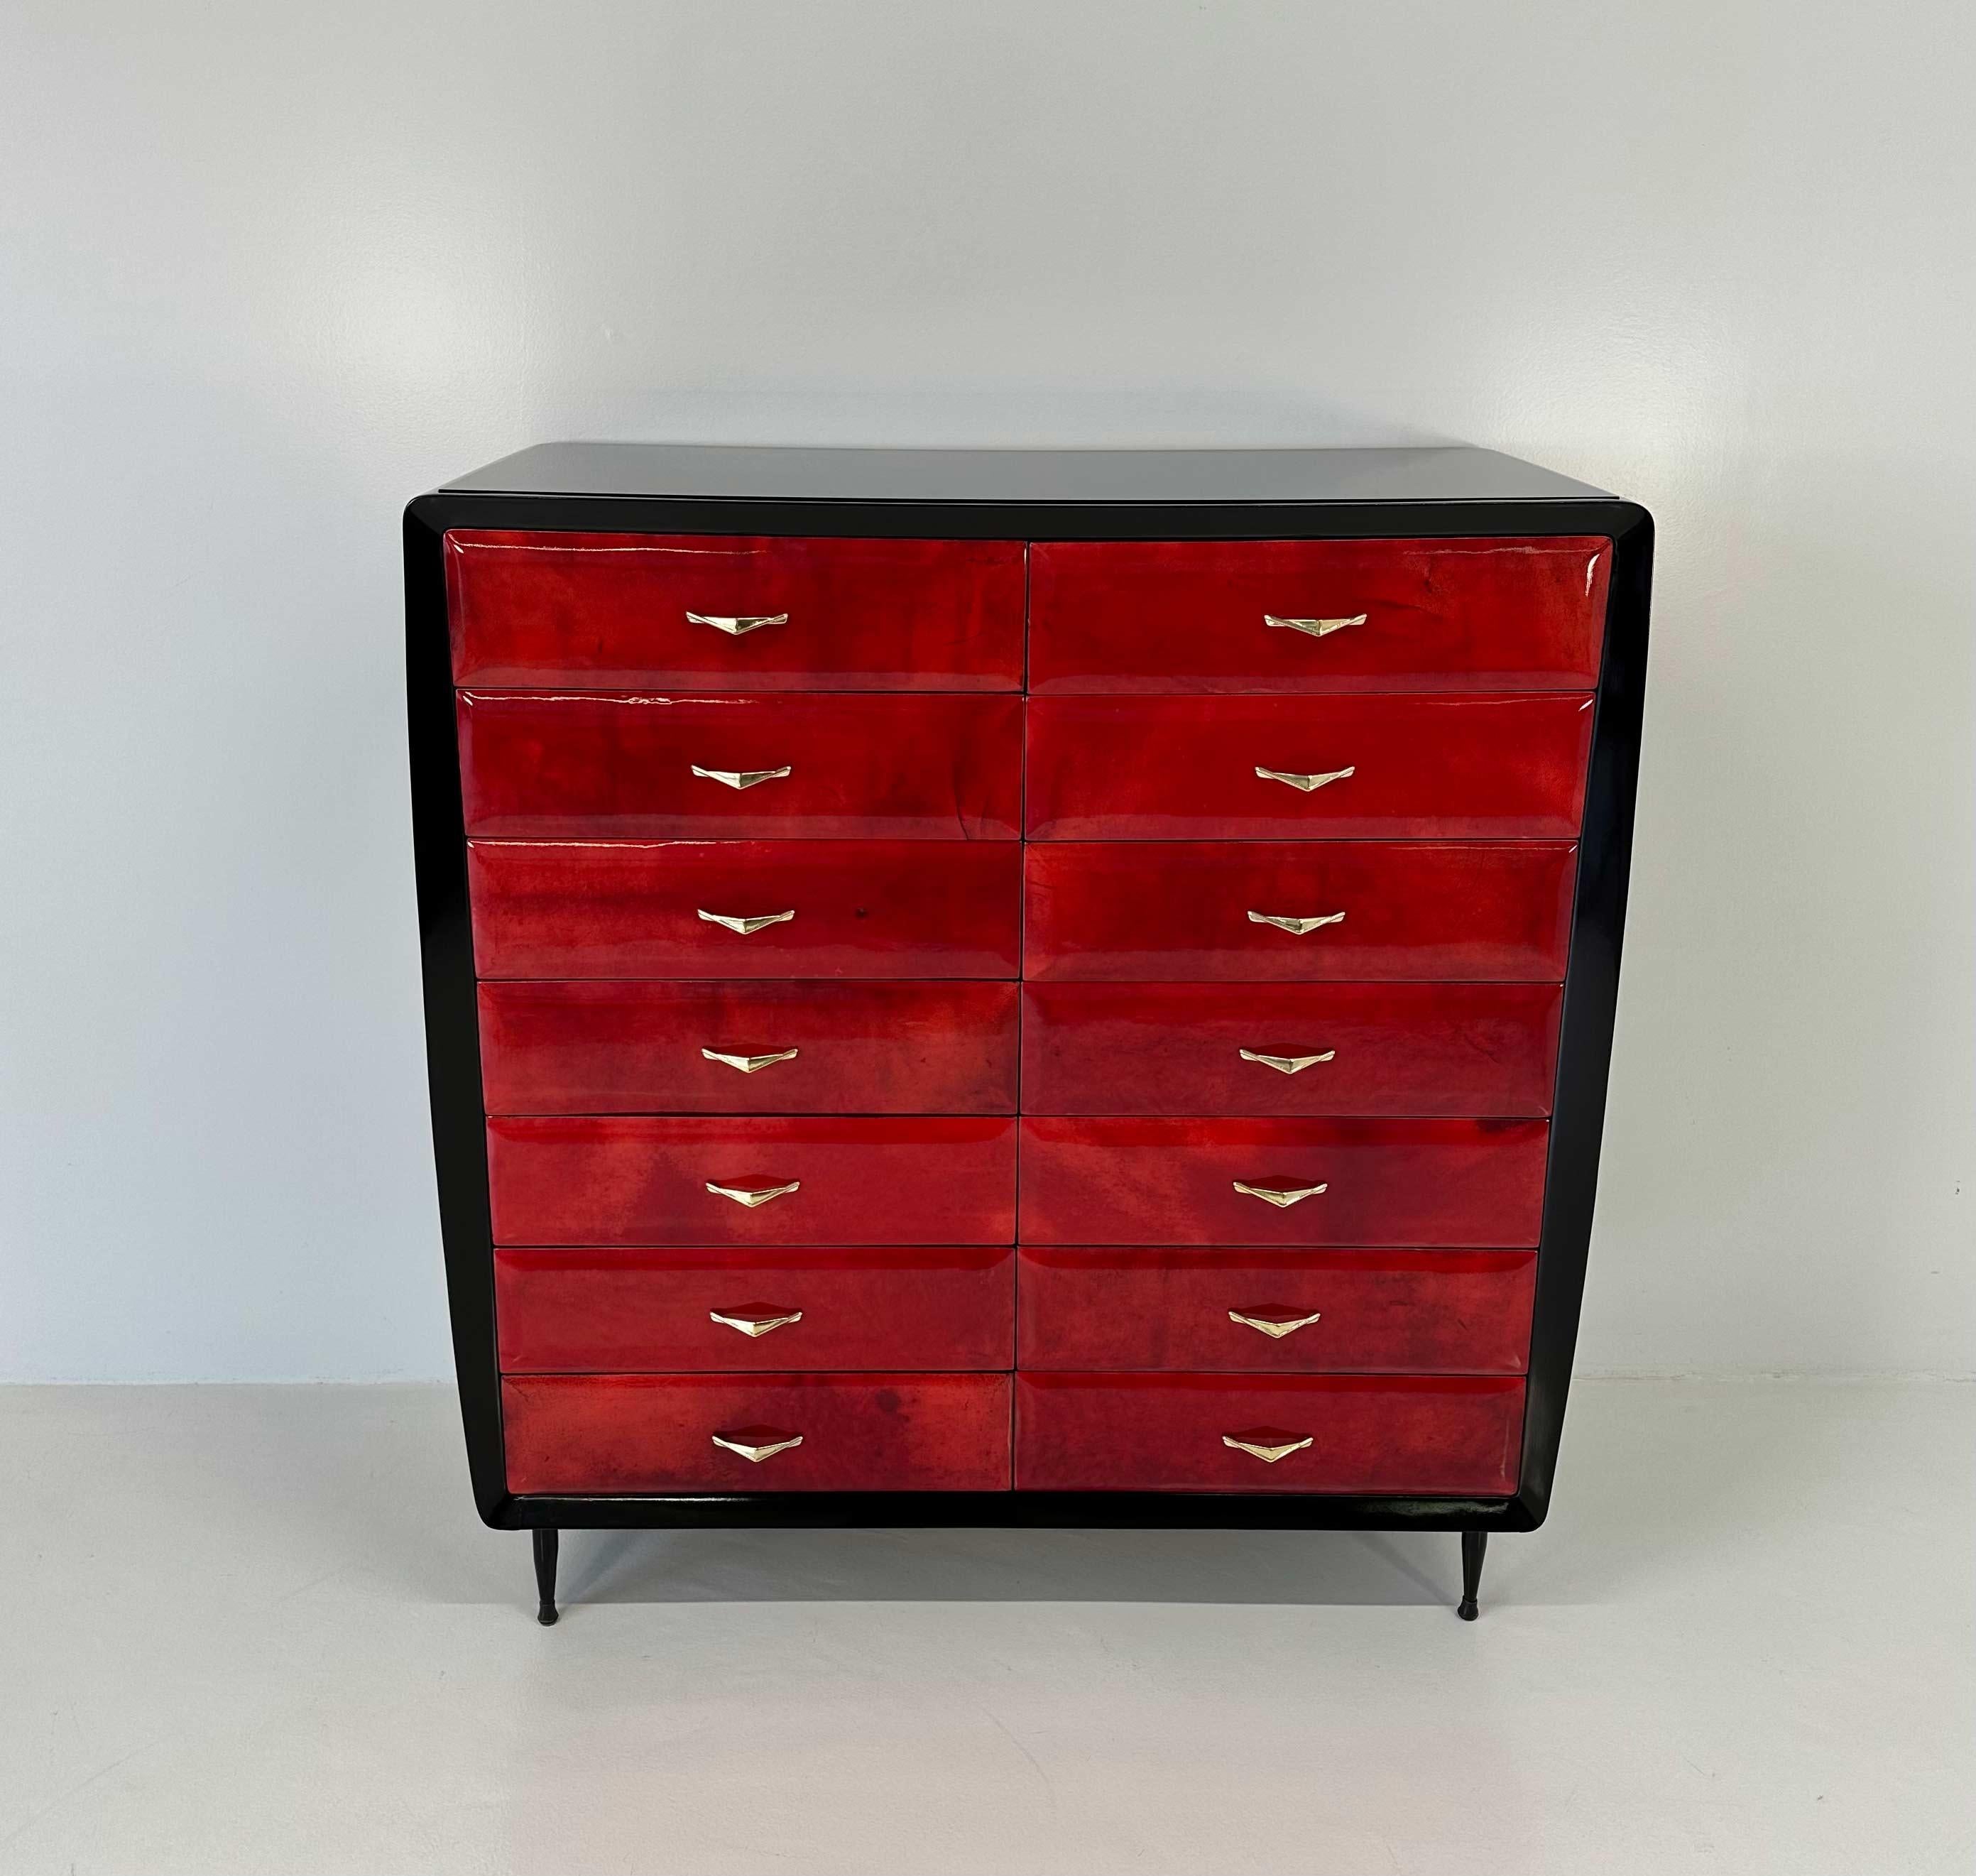 Italian Art Deco Cherry Red Parchment Chest of 14 Drawers, 1950s In Good Condition For Sale In Meda, MB